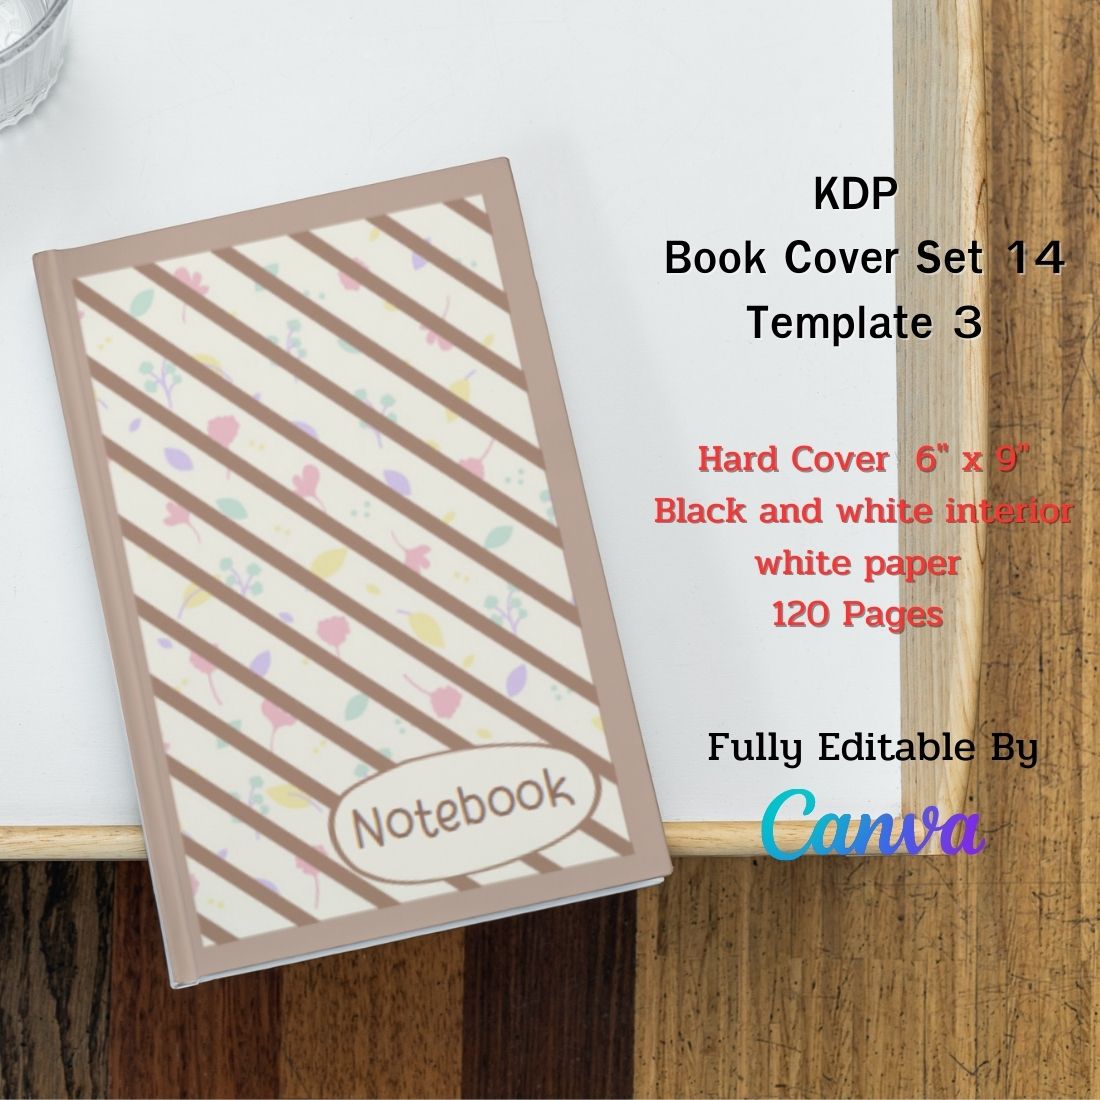 Note book cover set 14 template 3 hard cover and white paper 120 pages.